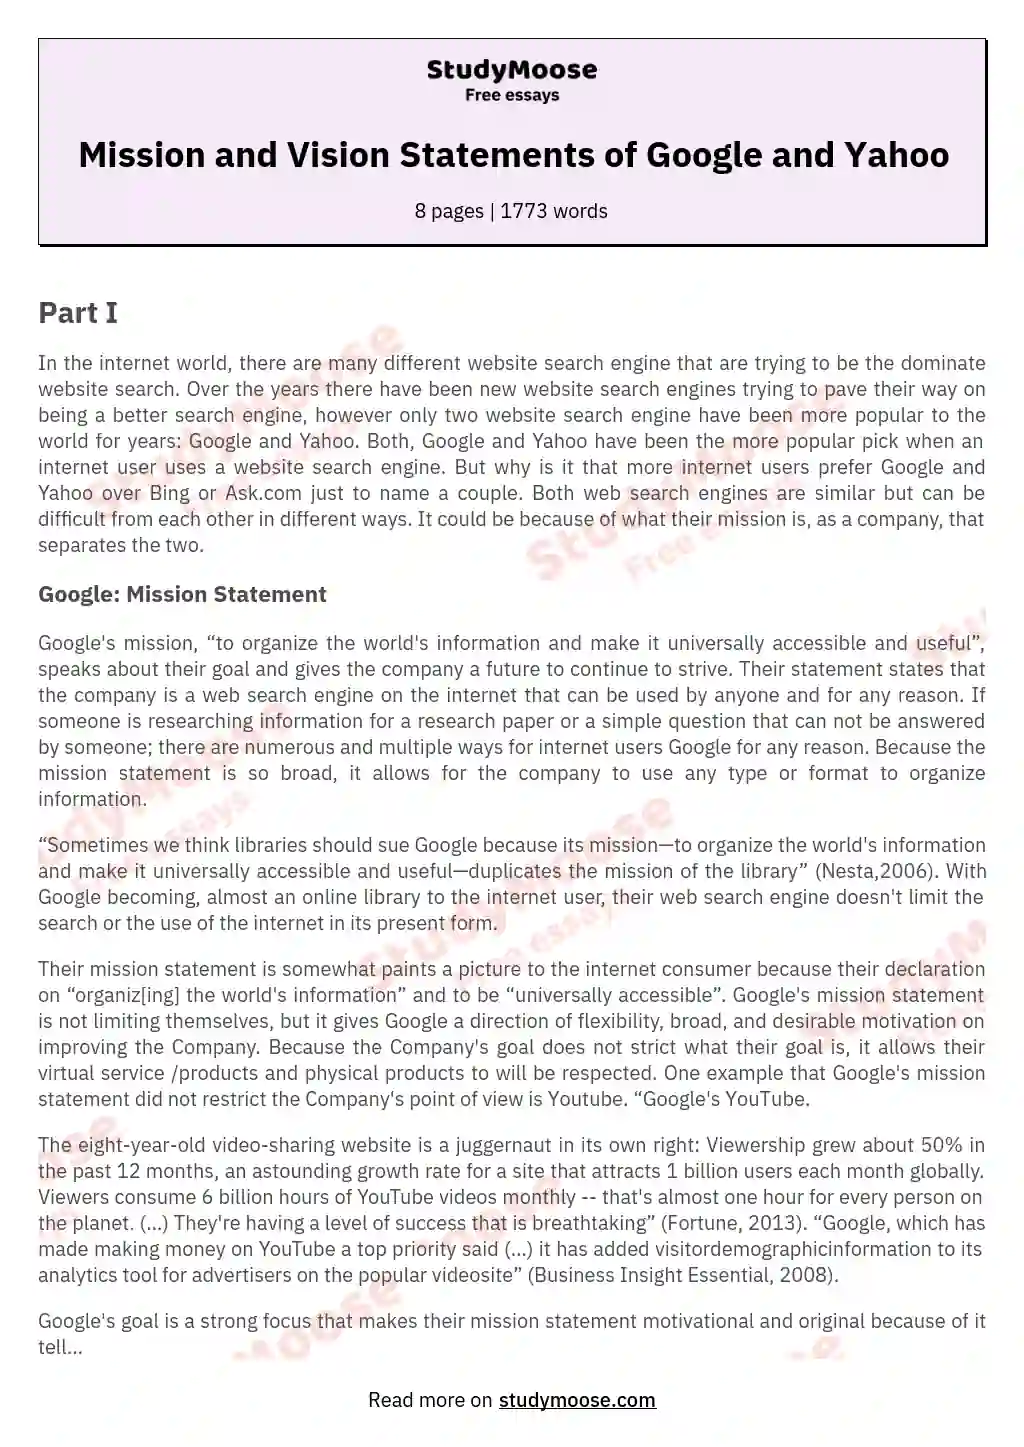 Mission and Vision Statements of Google and Yahoo essay